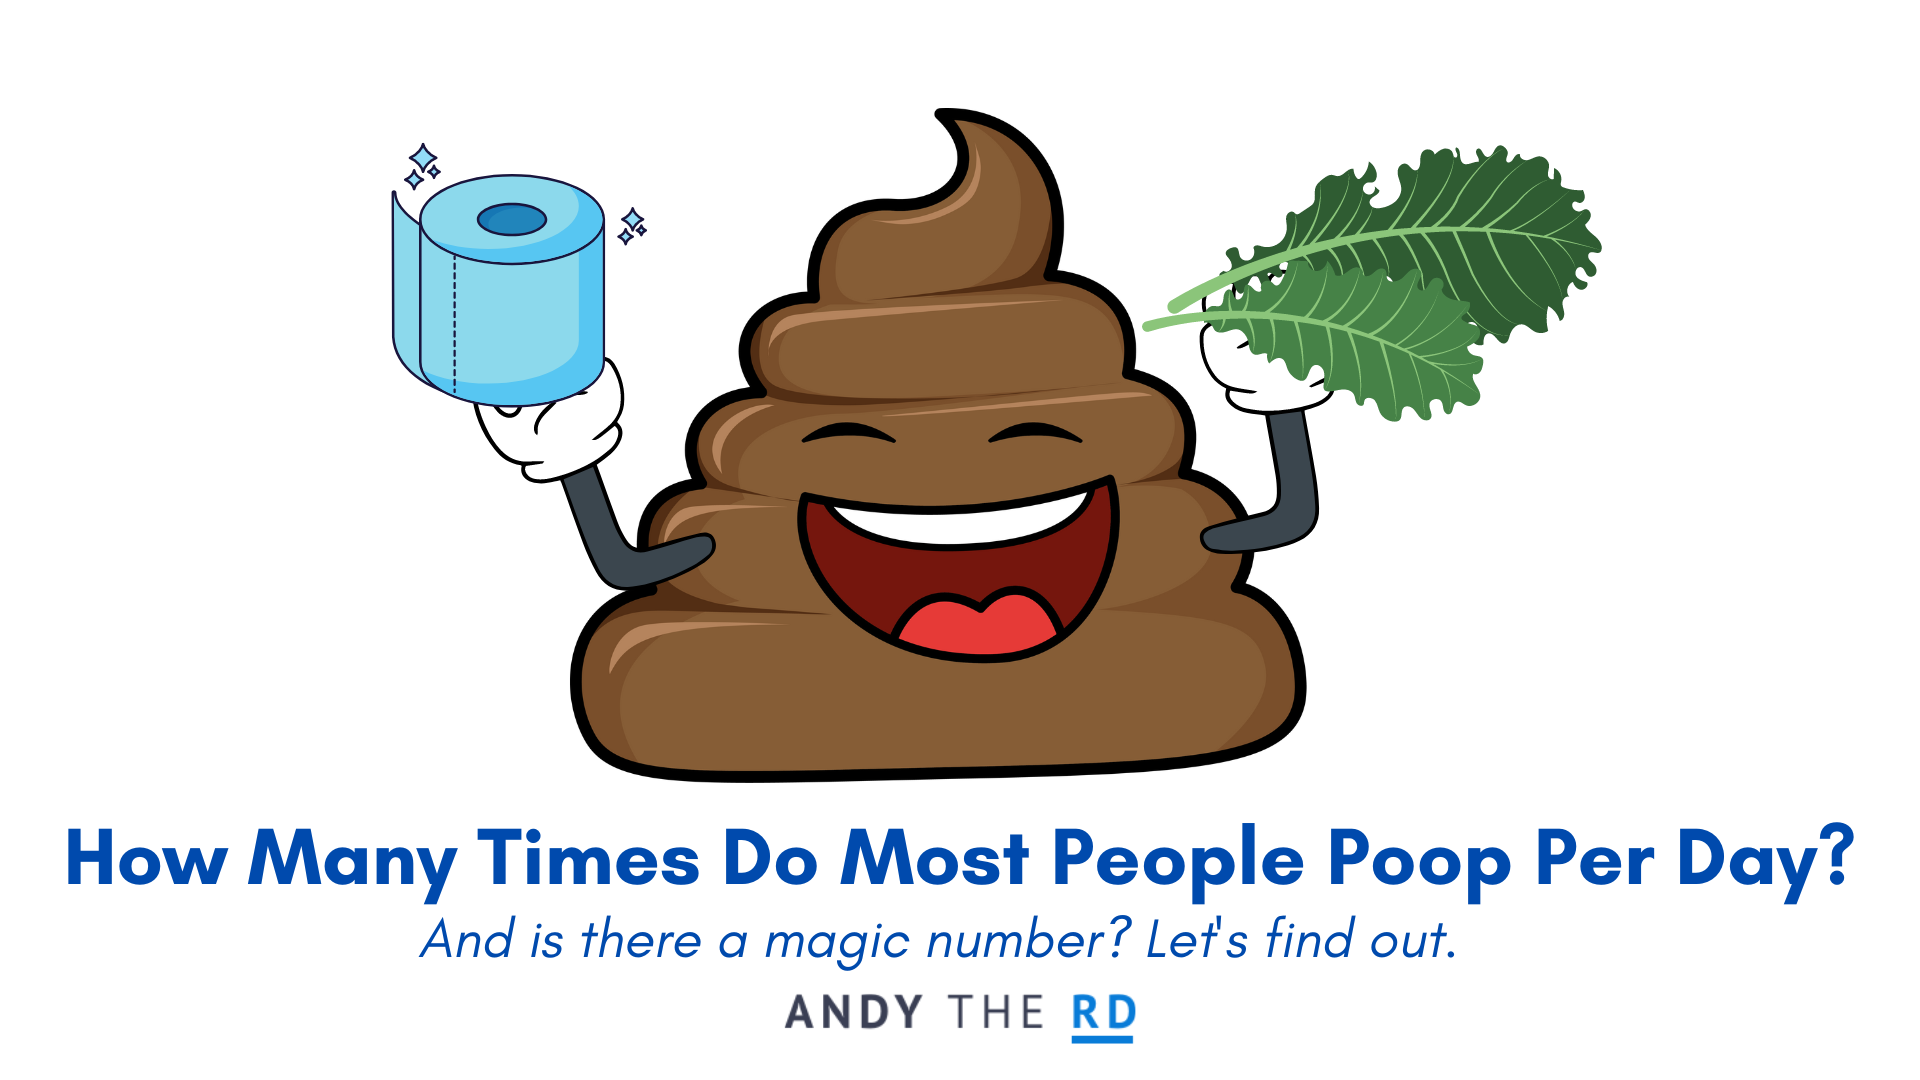 Why do I poop 30 times a day?